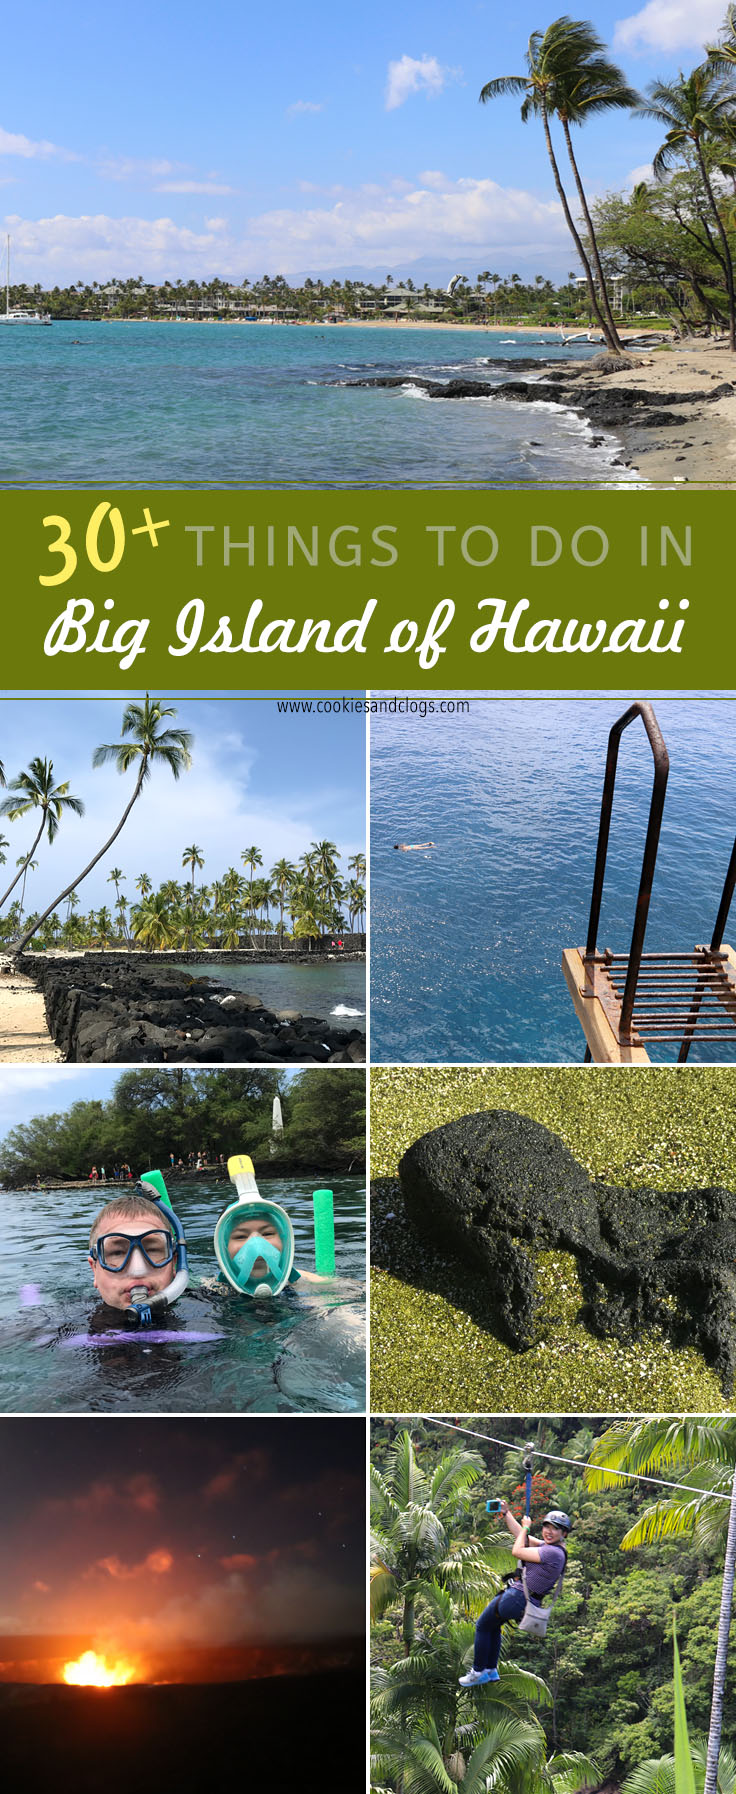 Cookies & Clogs | 30+ Family friendly things to do on the Big Island of Hawaii with kids. Hawaii family travel ideas and activities.